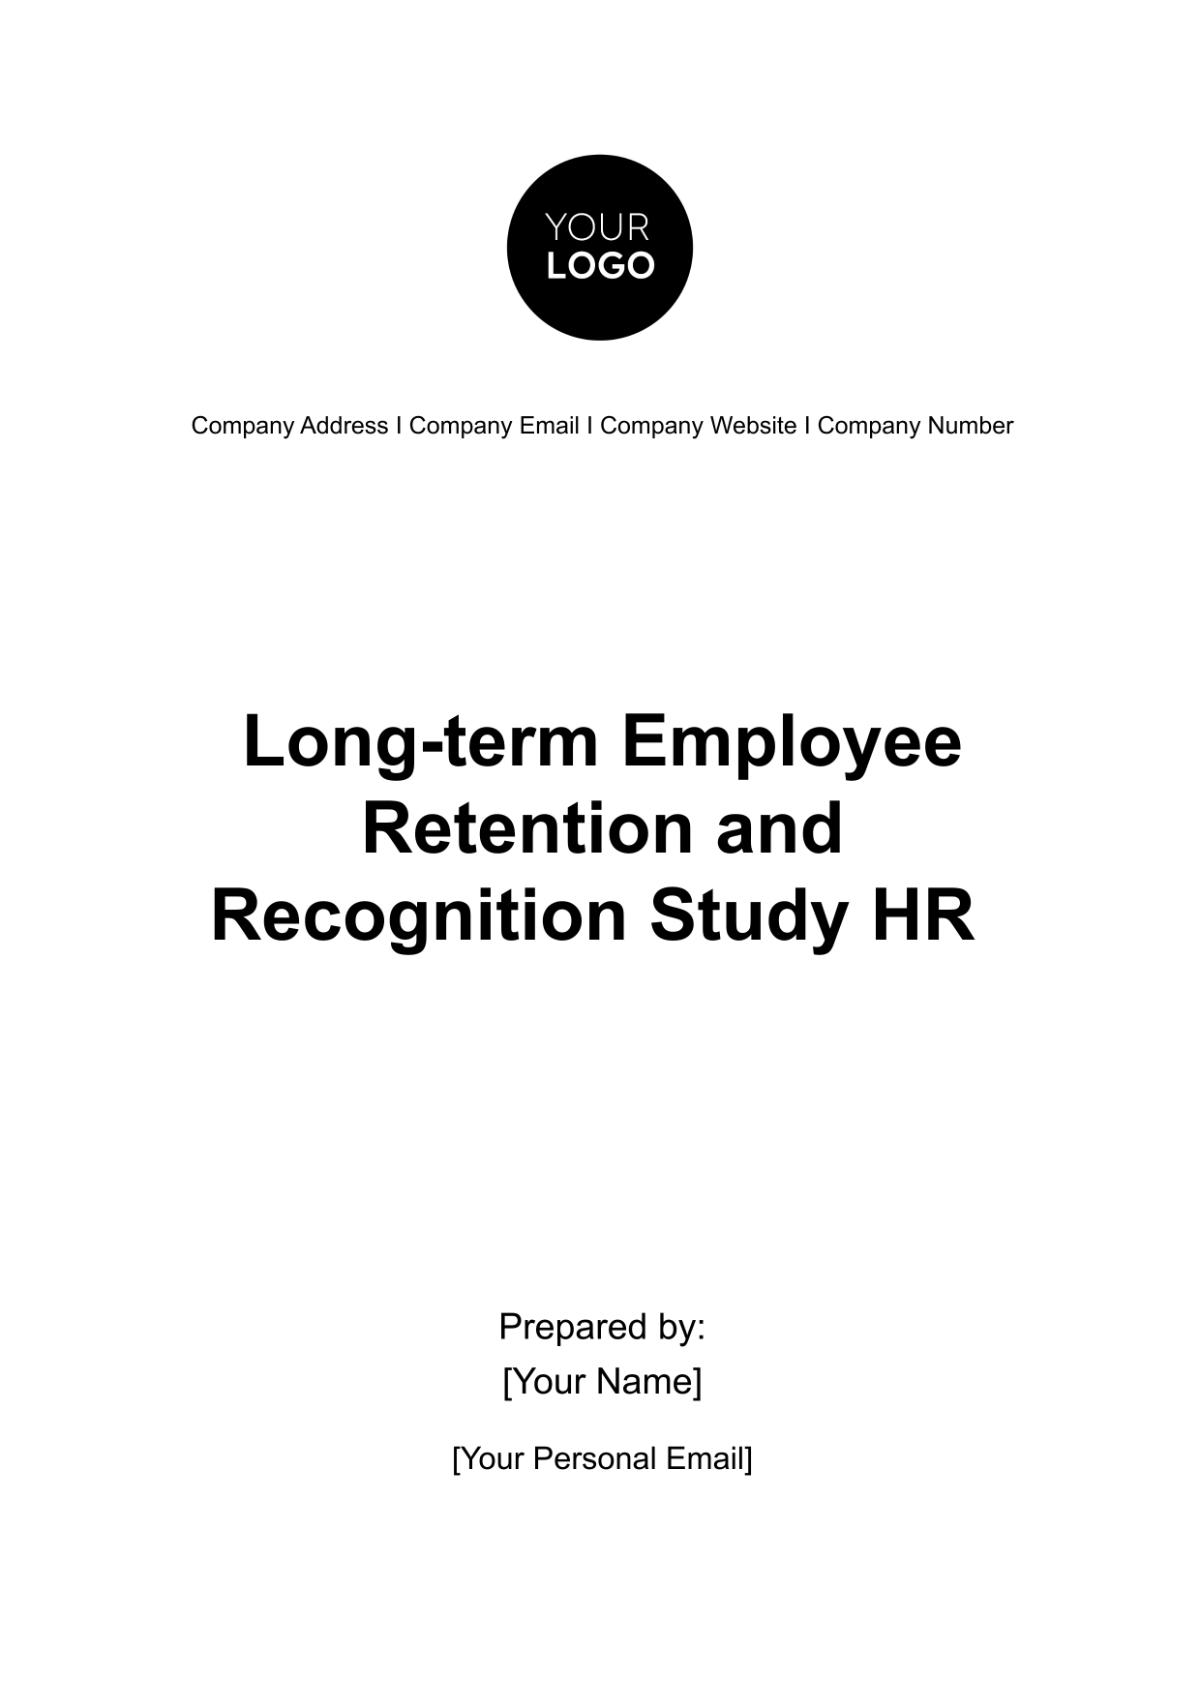 Long-term Employee Retention and Recognition Study HR Template